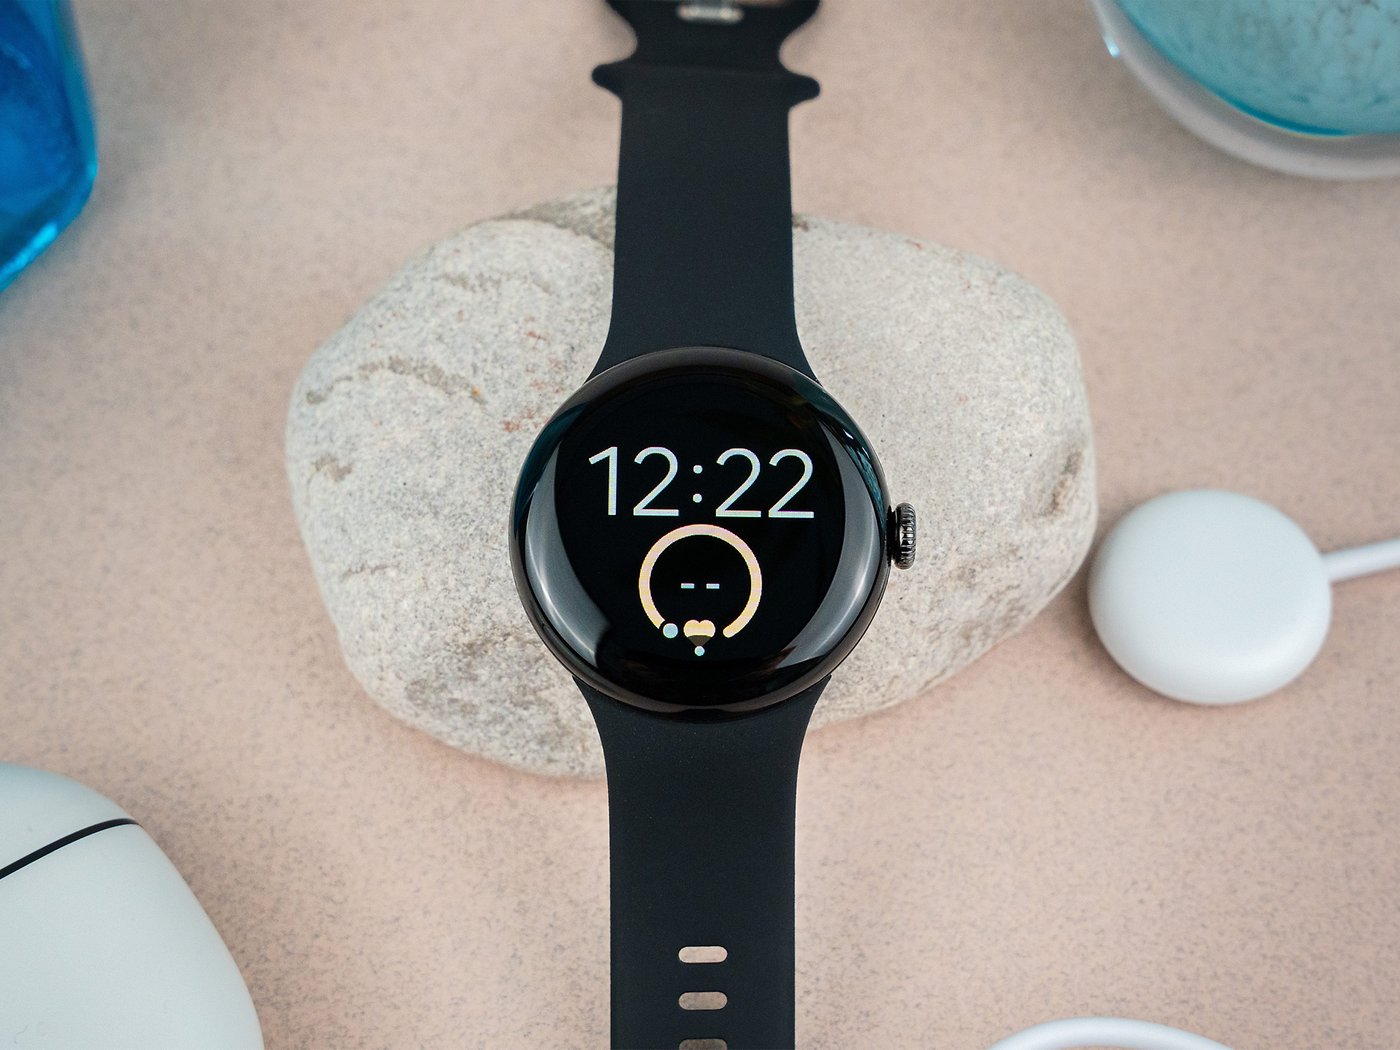 Google's Pixel Watch 2 Plunges to the New Best Price at $70 Off